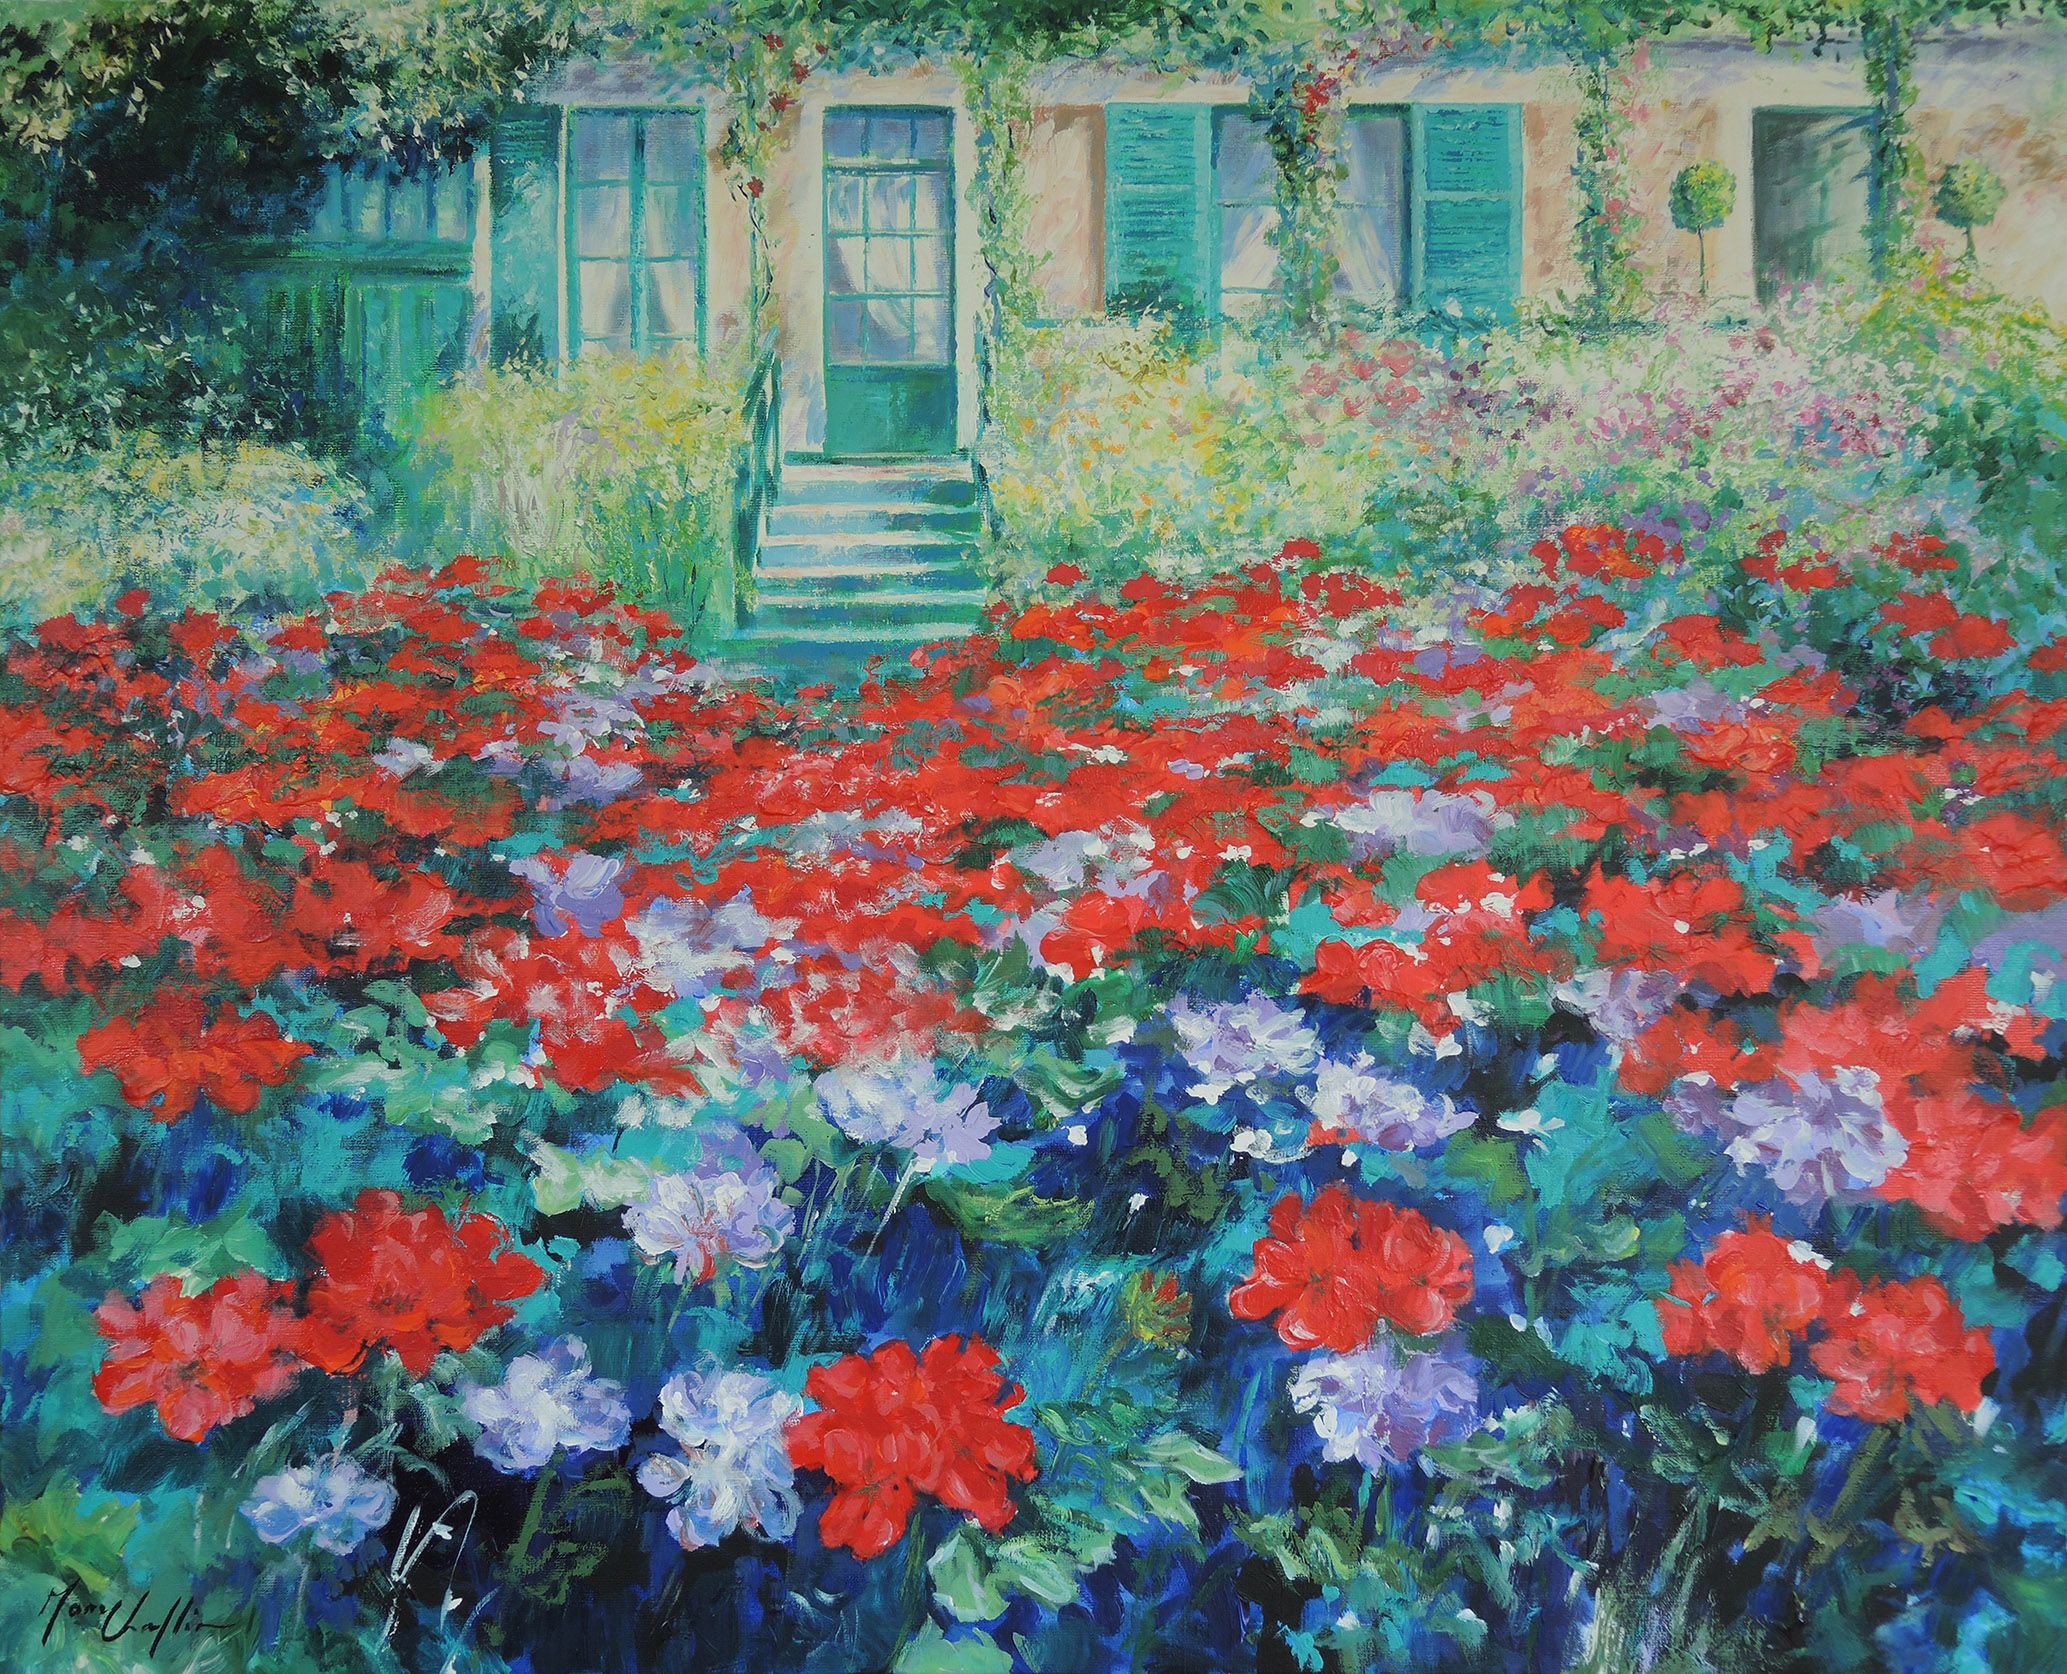 The Geranium Season at Claude Monet's House in Giverny by Mary Chaplin